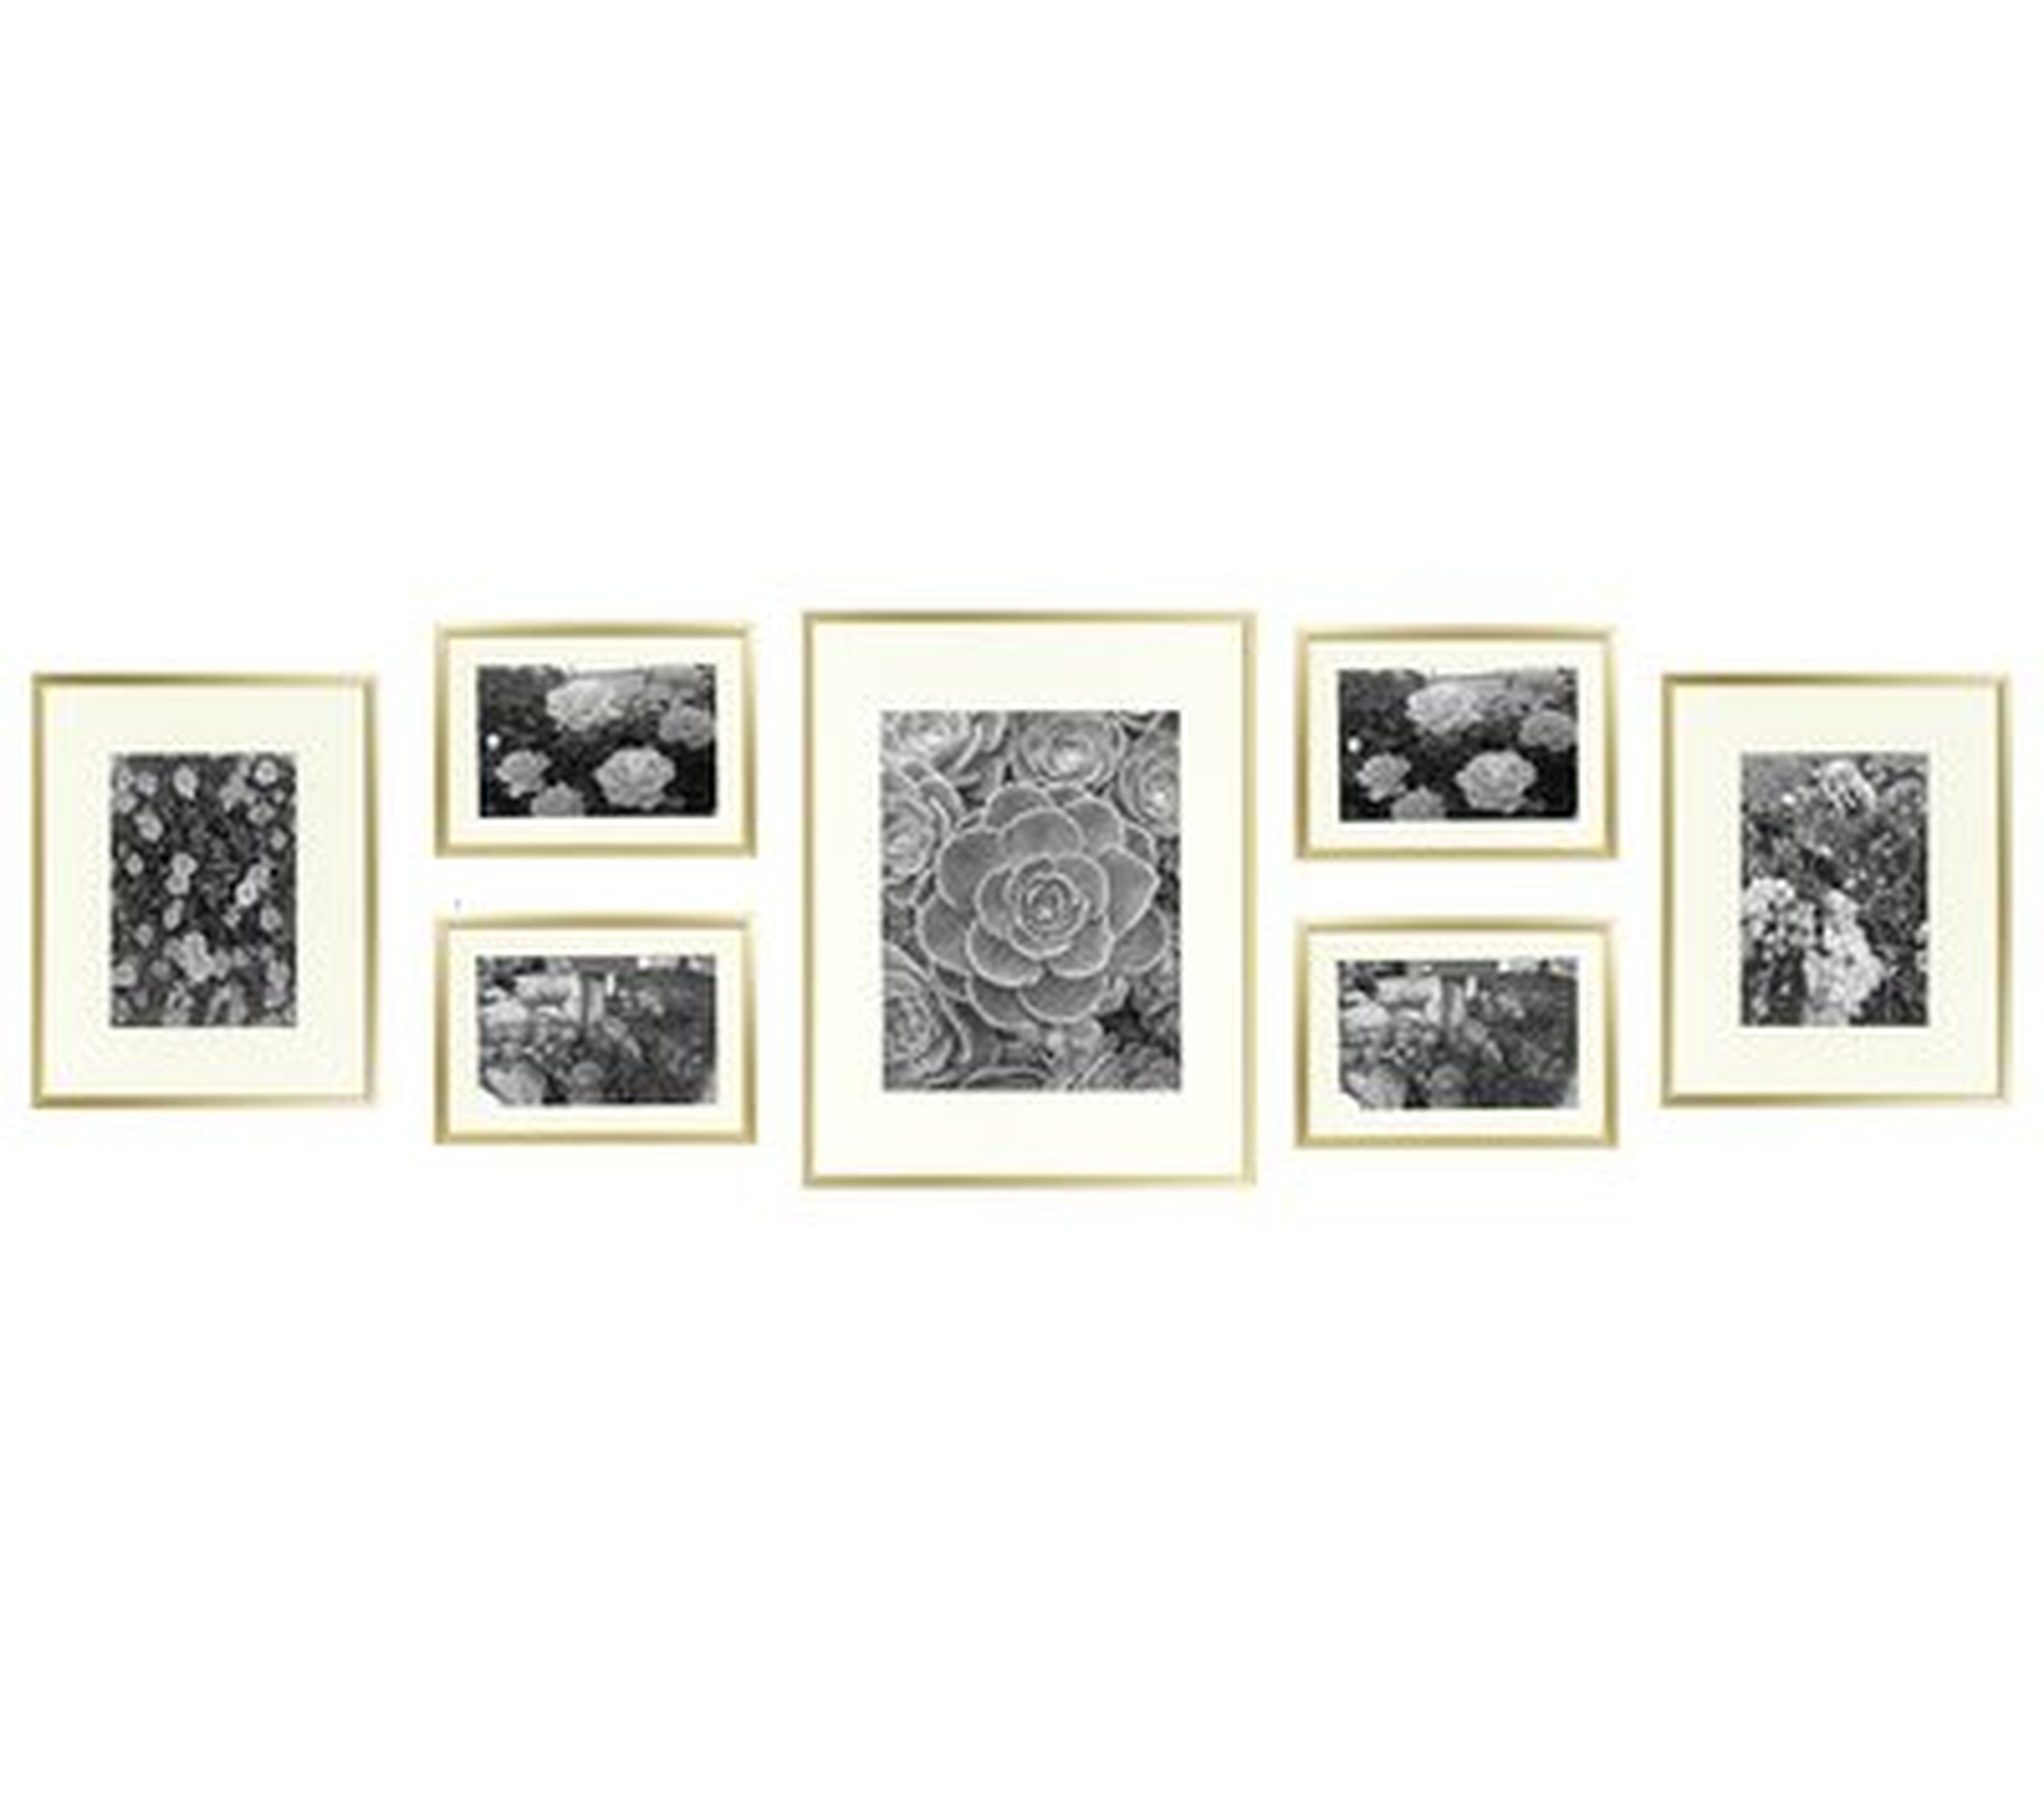 7 Piece Alisson Gallery Wall Aluminum Picture Frame Set - Birch Lane